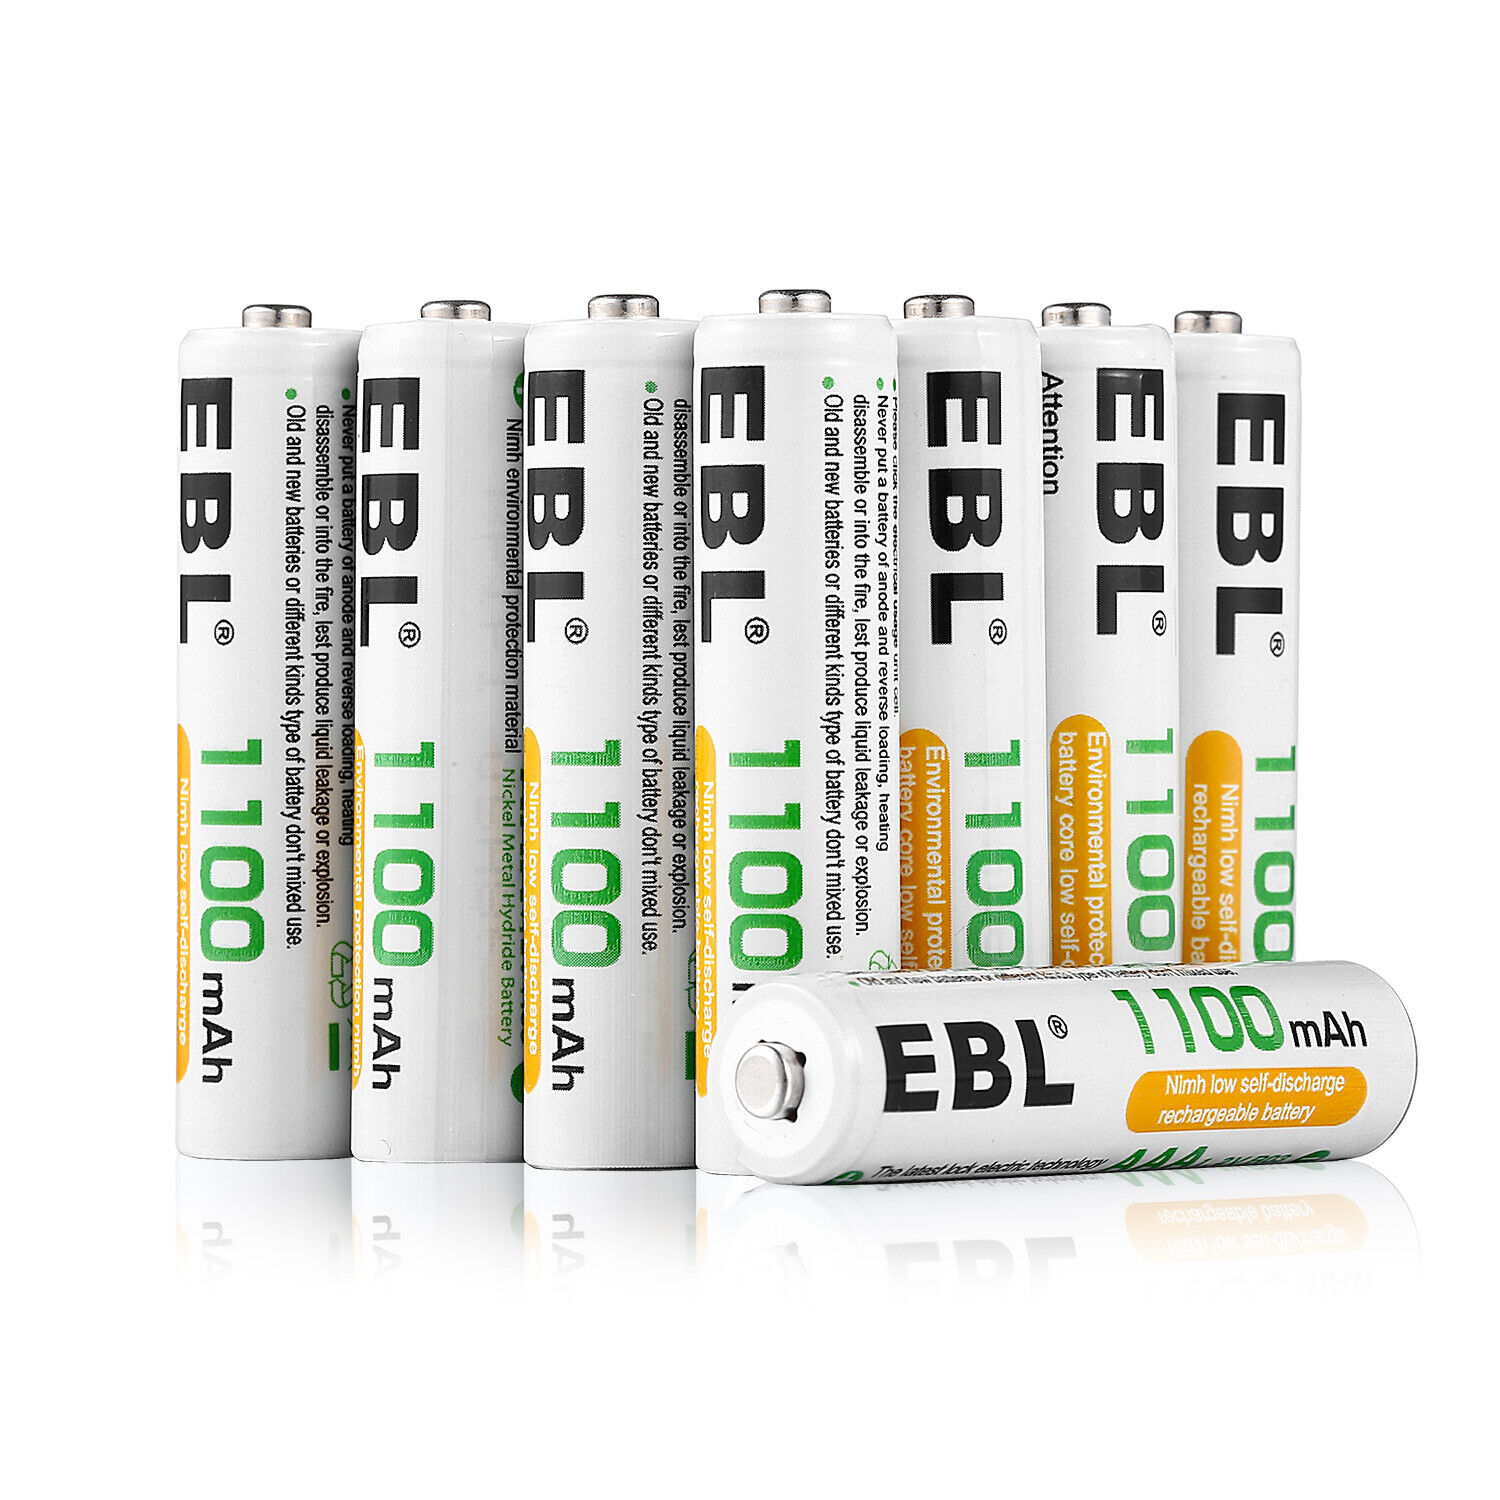 EBL 1100mAh Ni-MH Precharged Long Lasting AAA Rechargeable Batteries 8 Counts